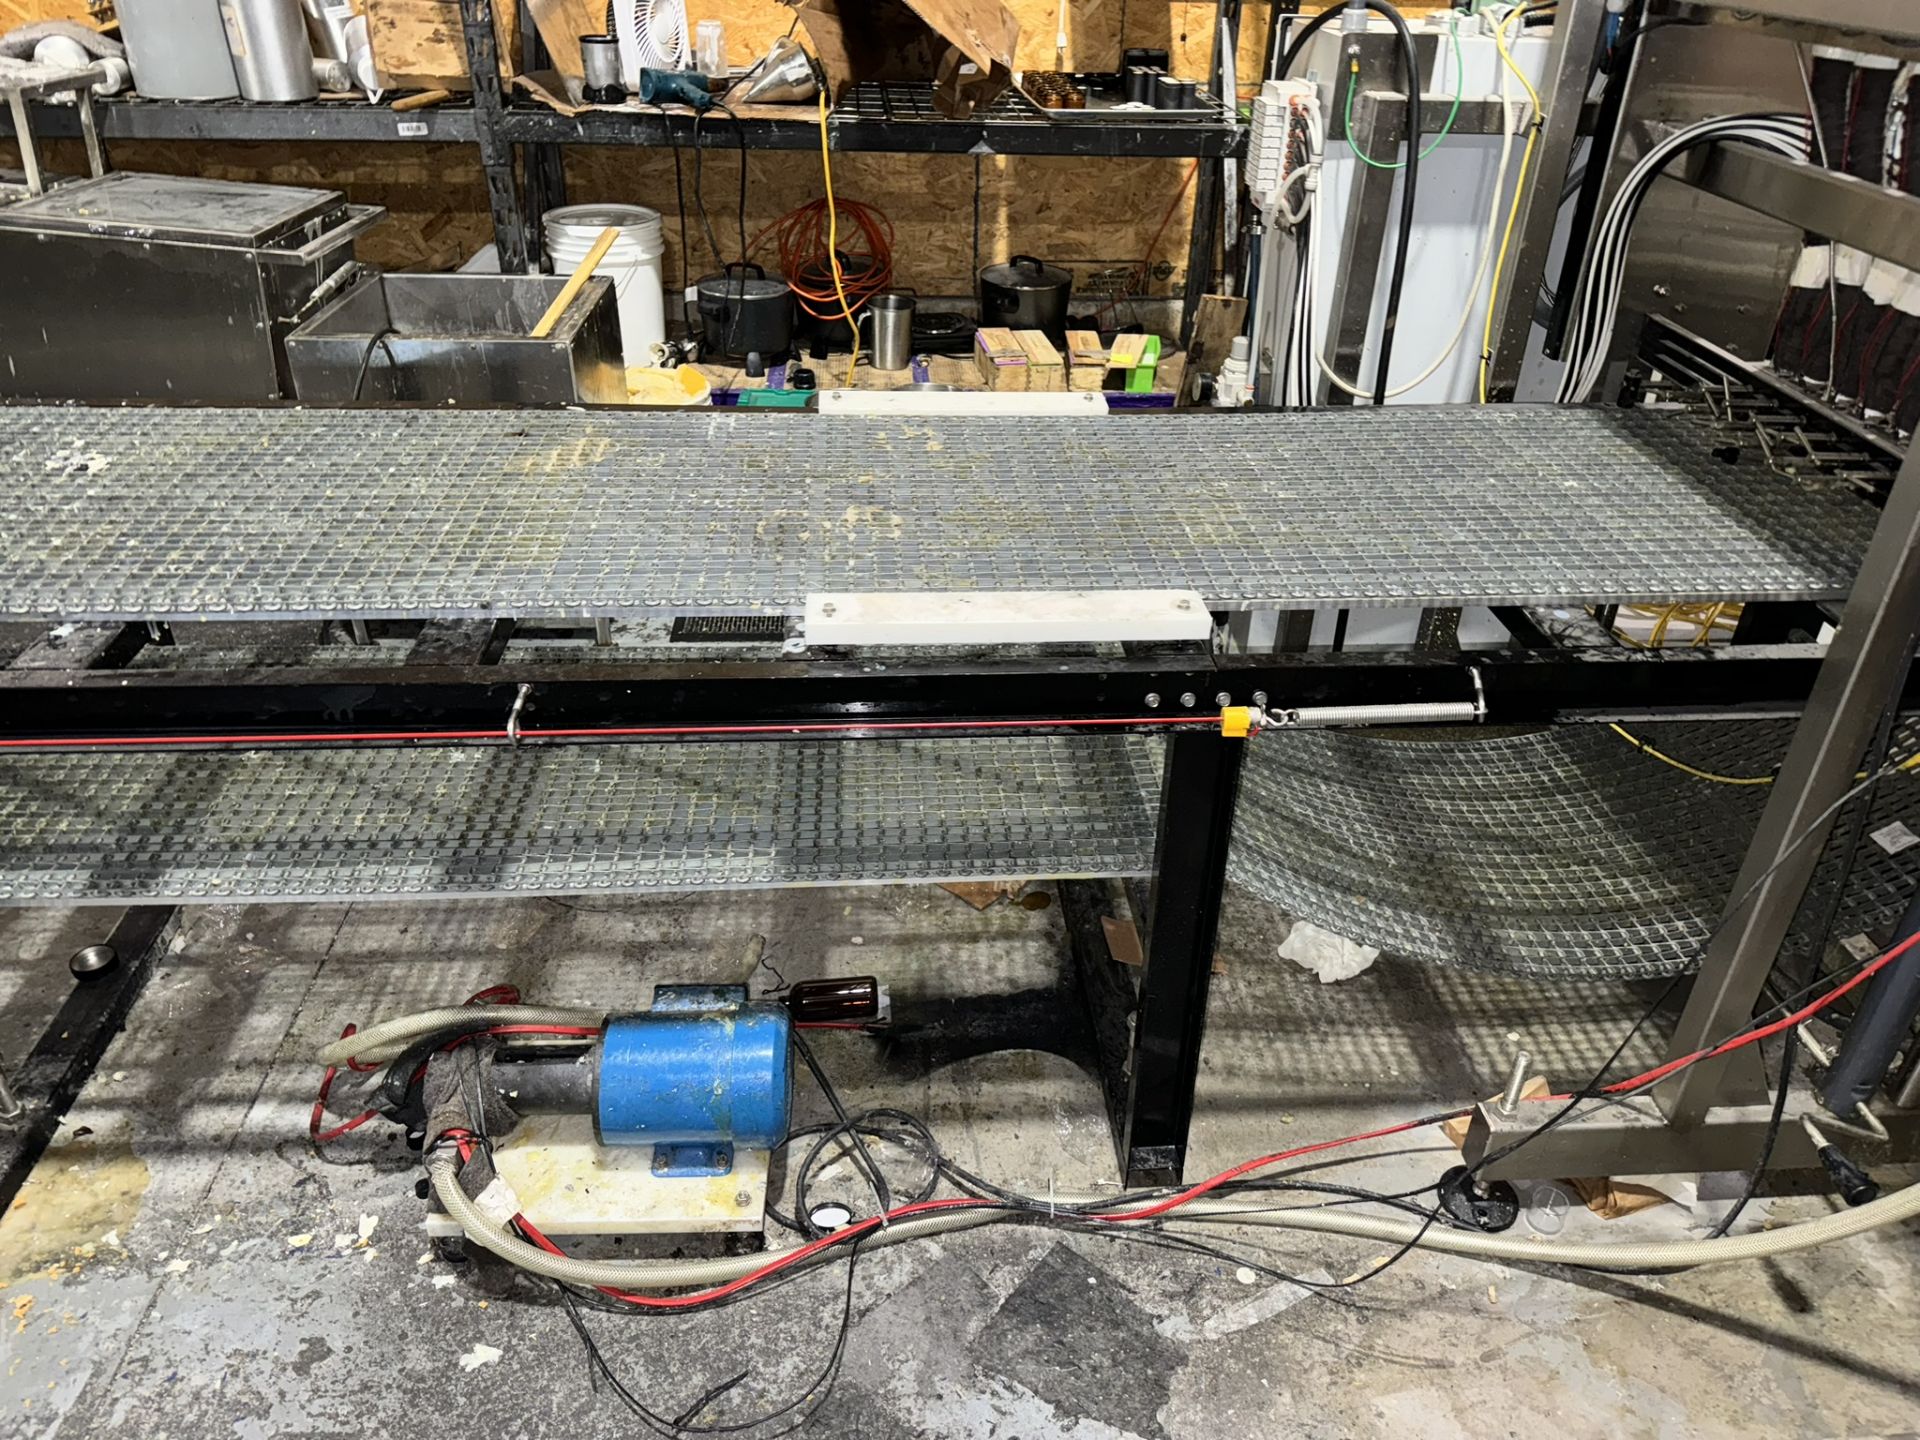 2018 E-PAK Cooling Conveyor, S/N 0318-47616-216-045, 115 Volts, 1 Phase, with Control Panel with - Bild 11 aus 11